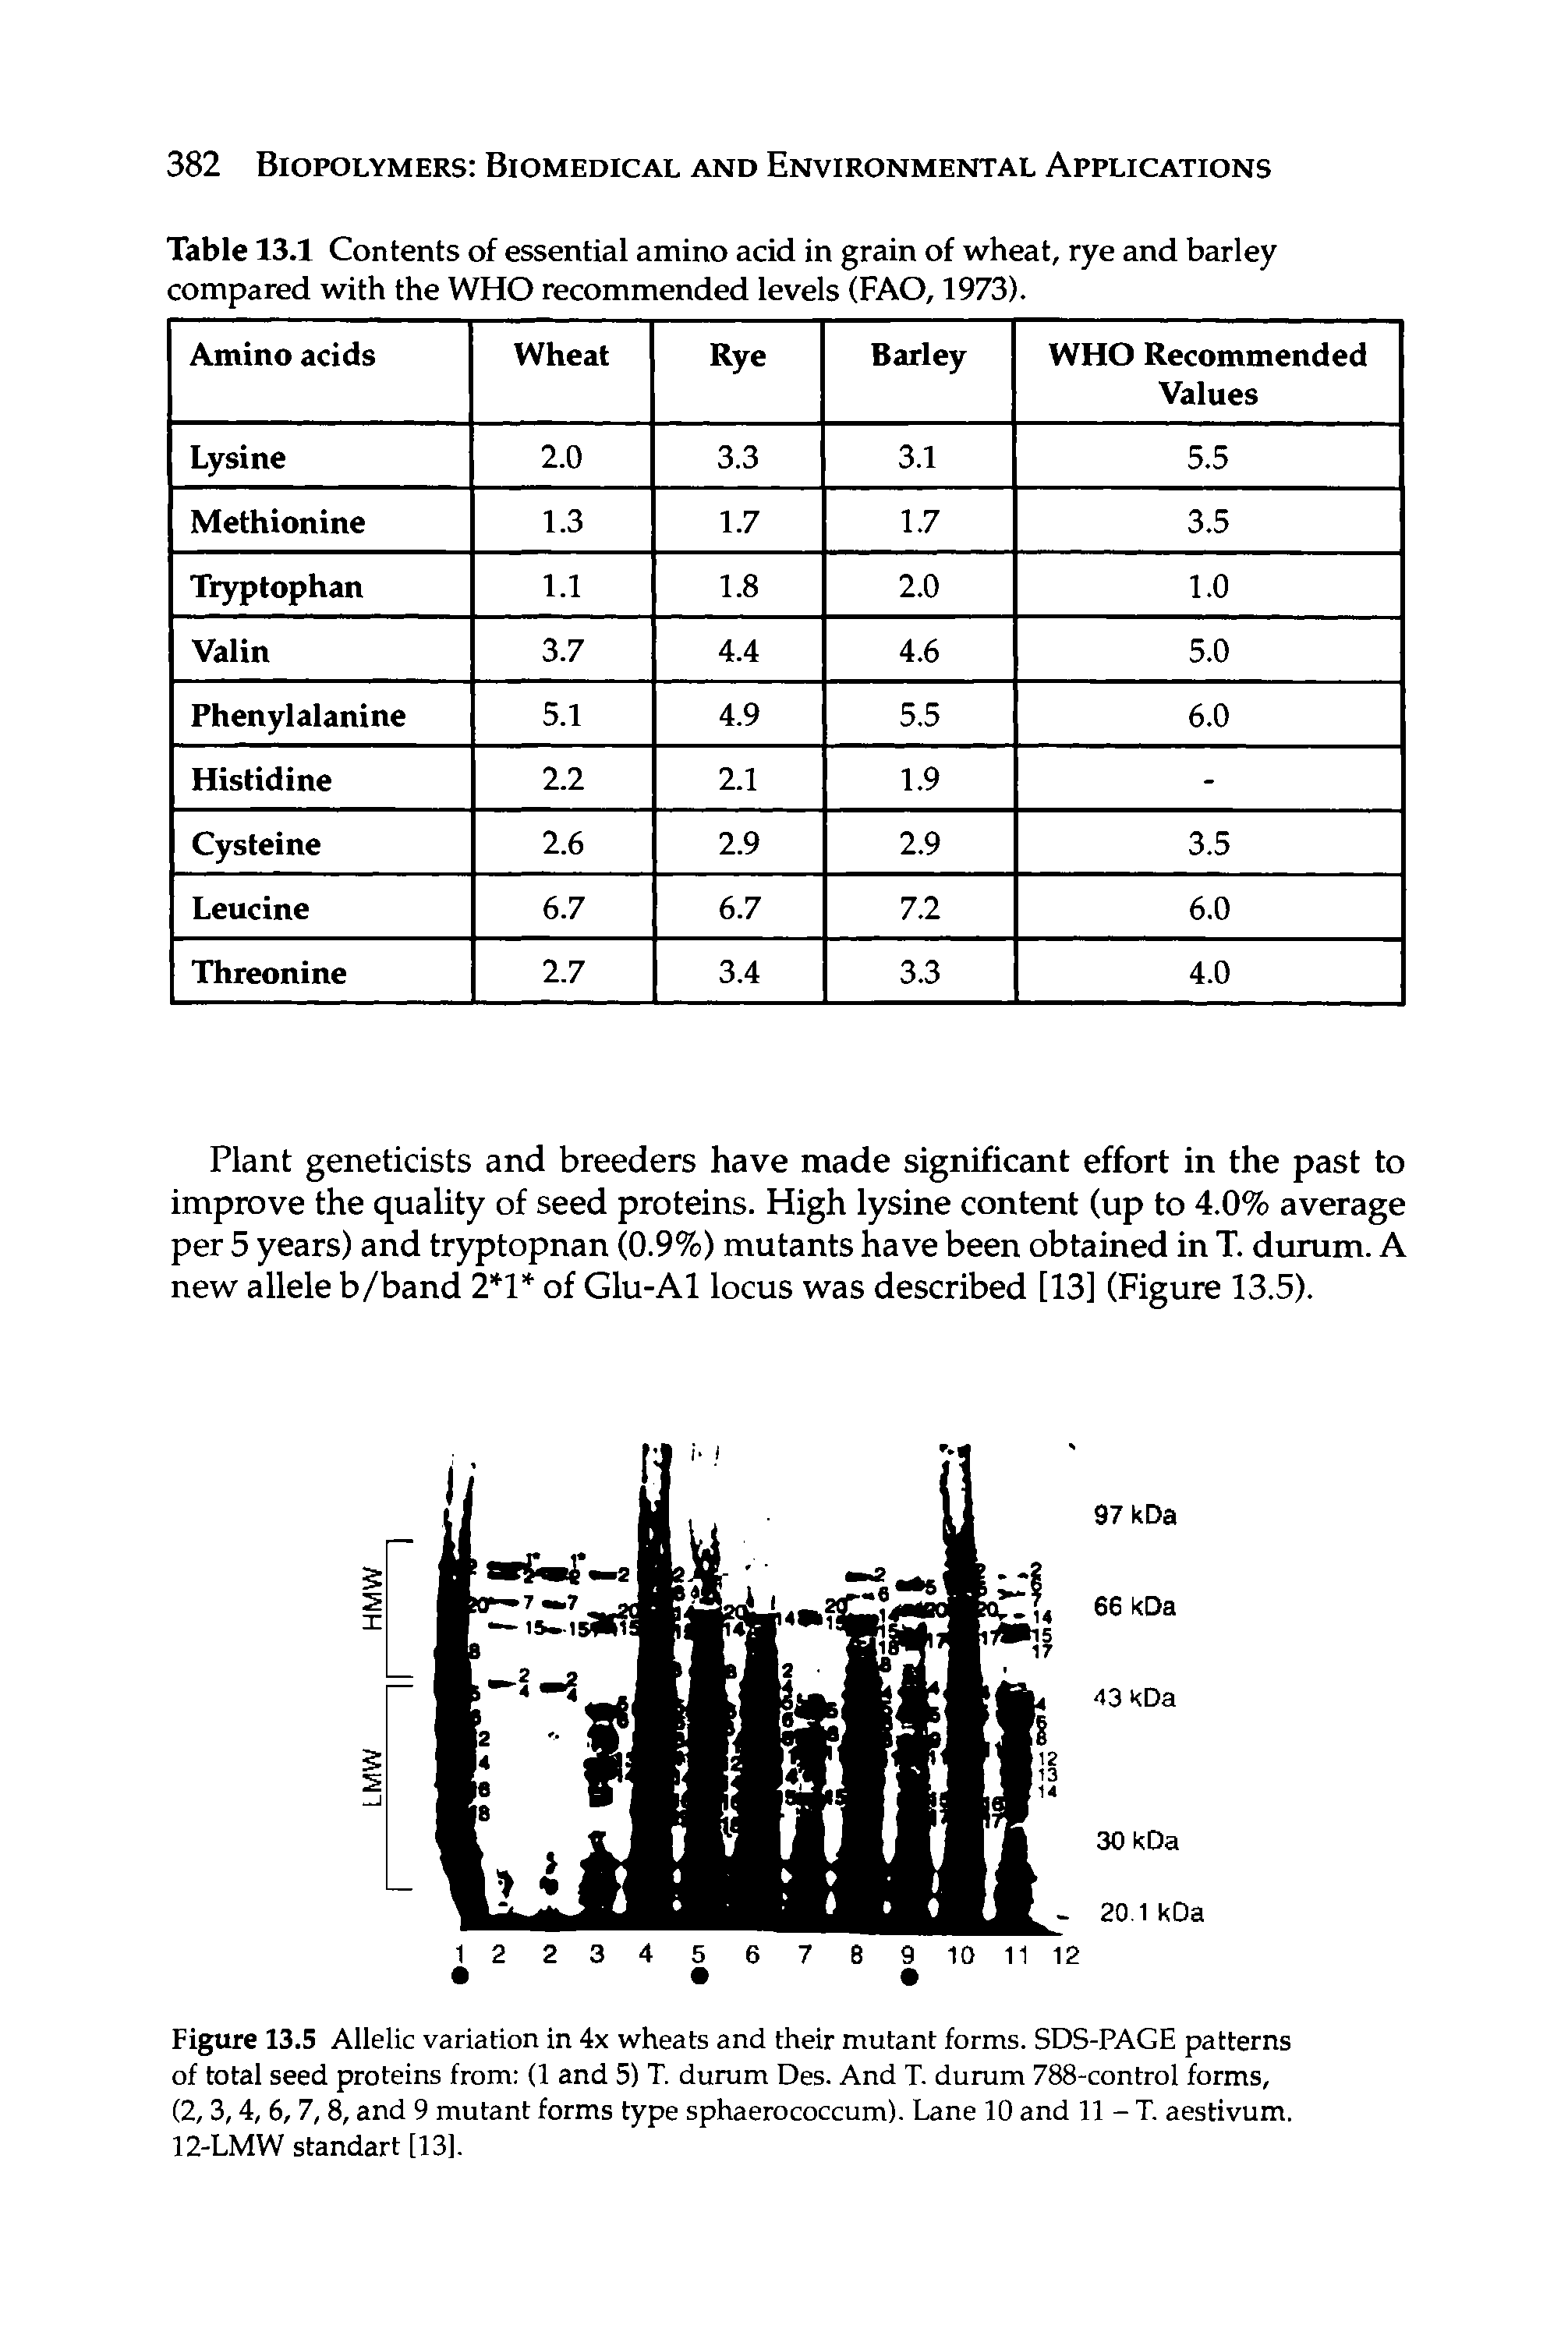 Table 13.1 Contents of essential amino acid in grain of wheat, rye and barley compared with the WHO recommended levels (FAO, 1973).